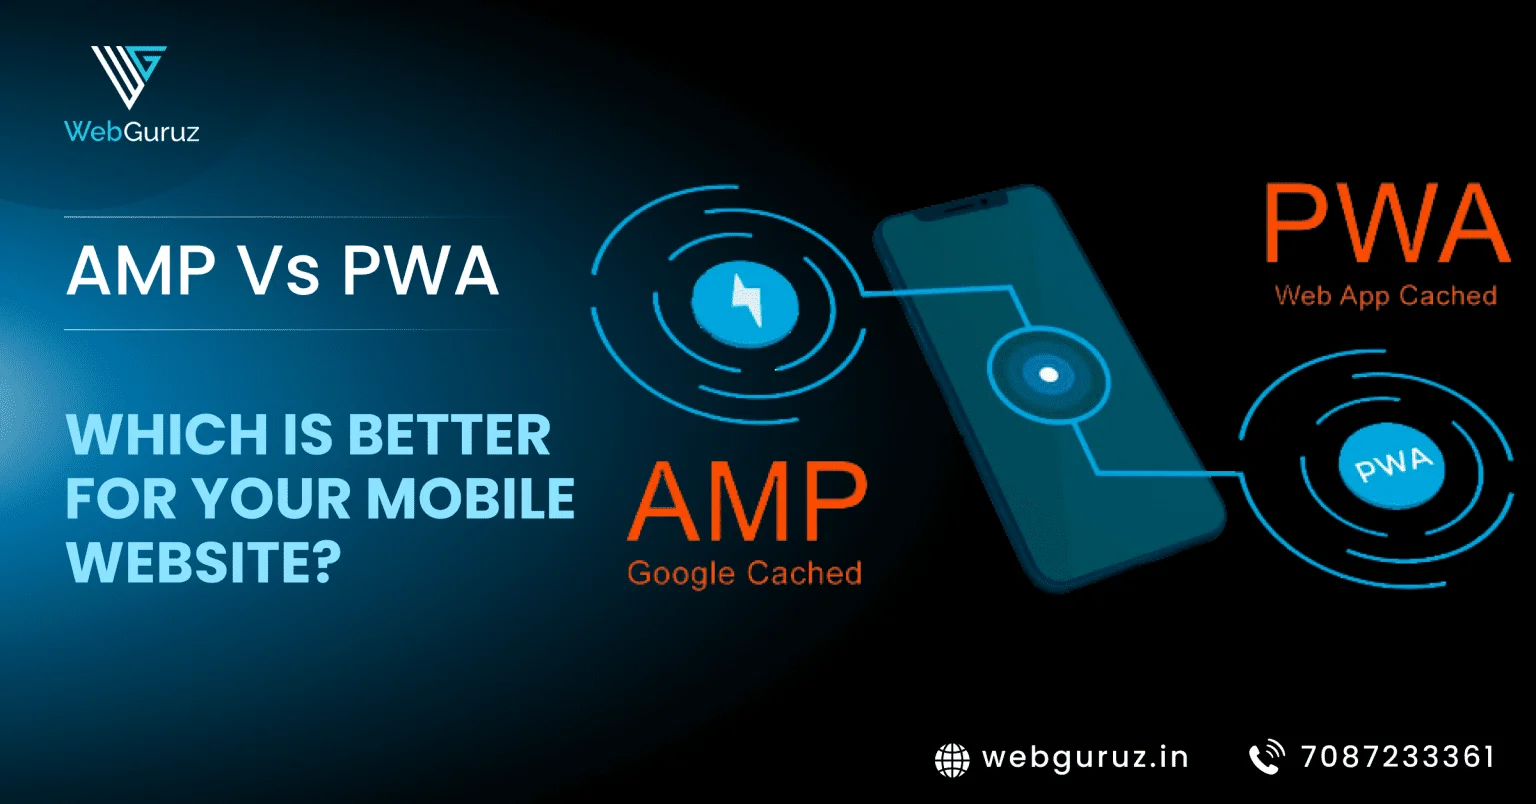 AMP vs. PWA, which is better?